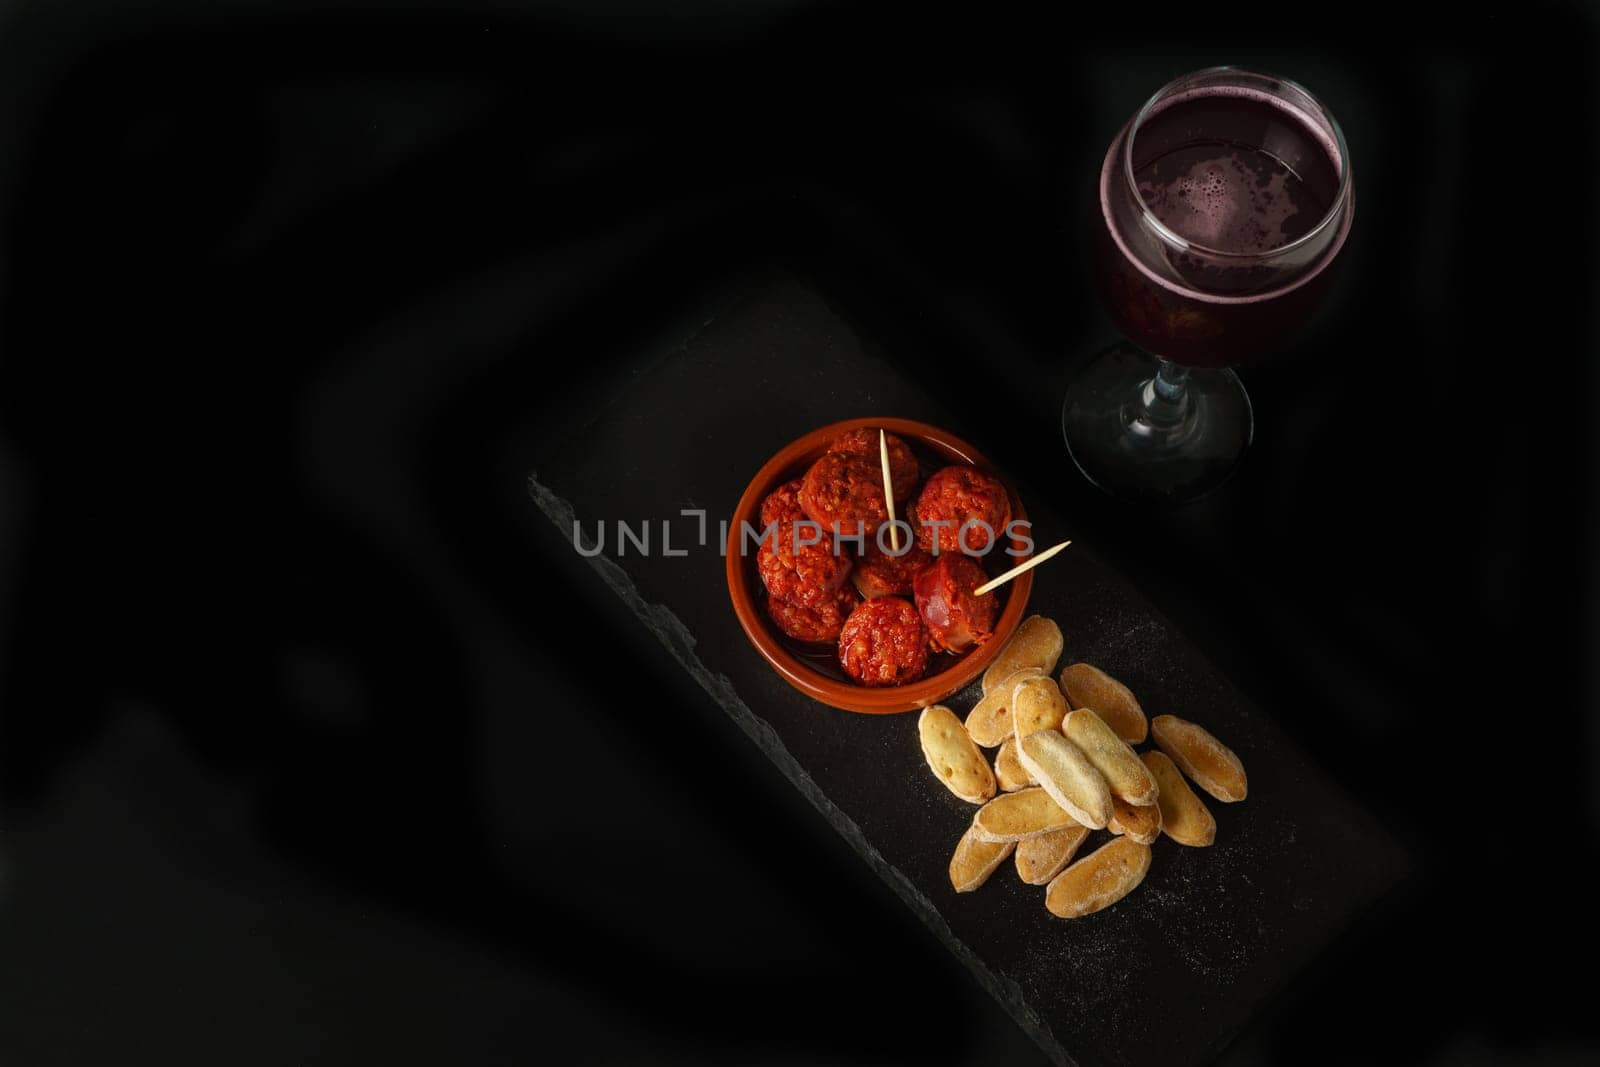 top view of an earthenware casserole with fried sausage, bread and a glass of wine isolated on a black background.